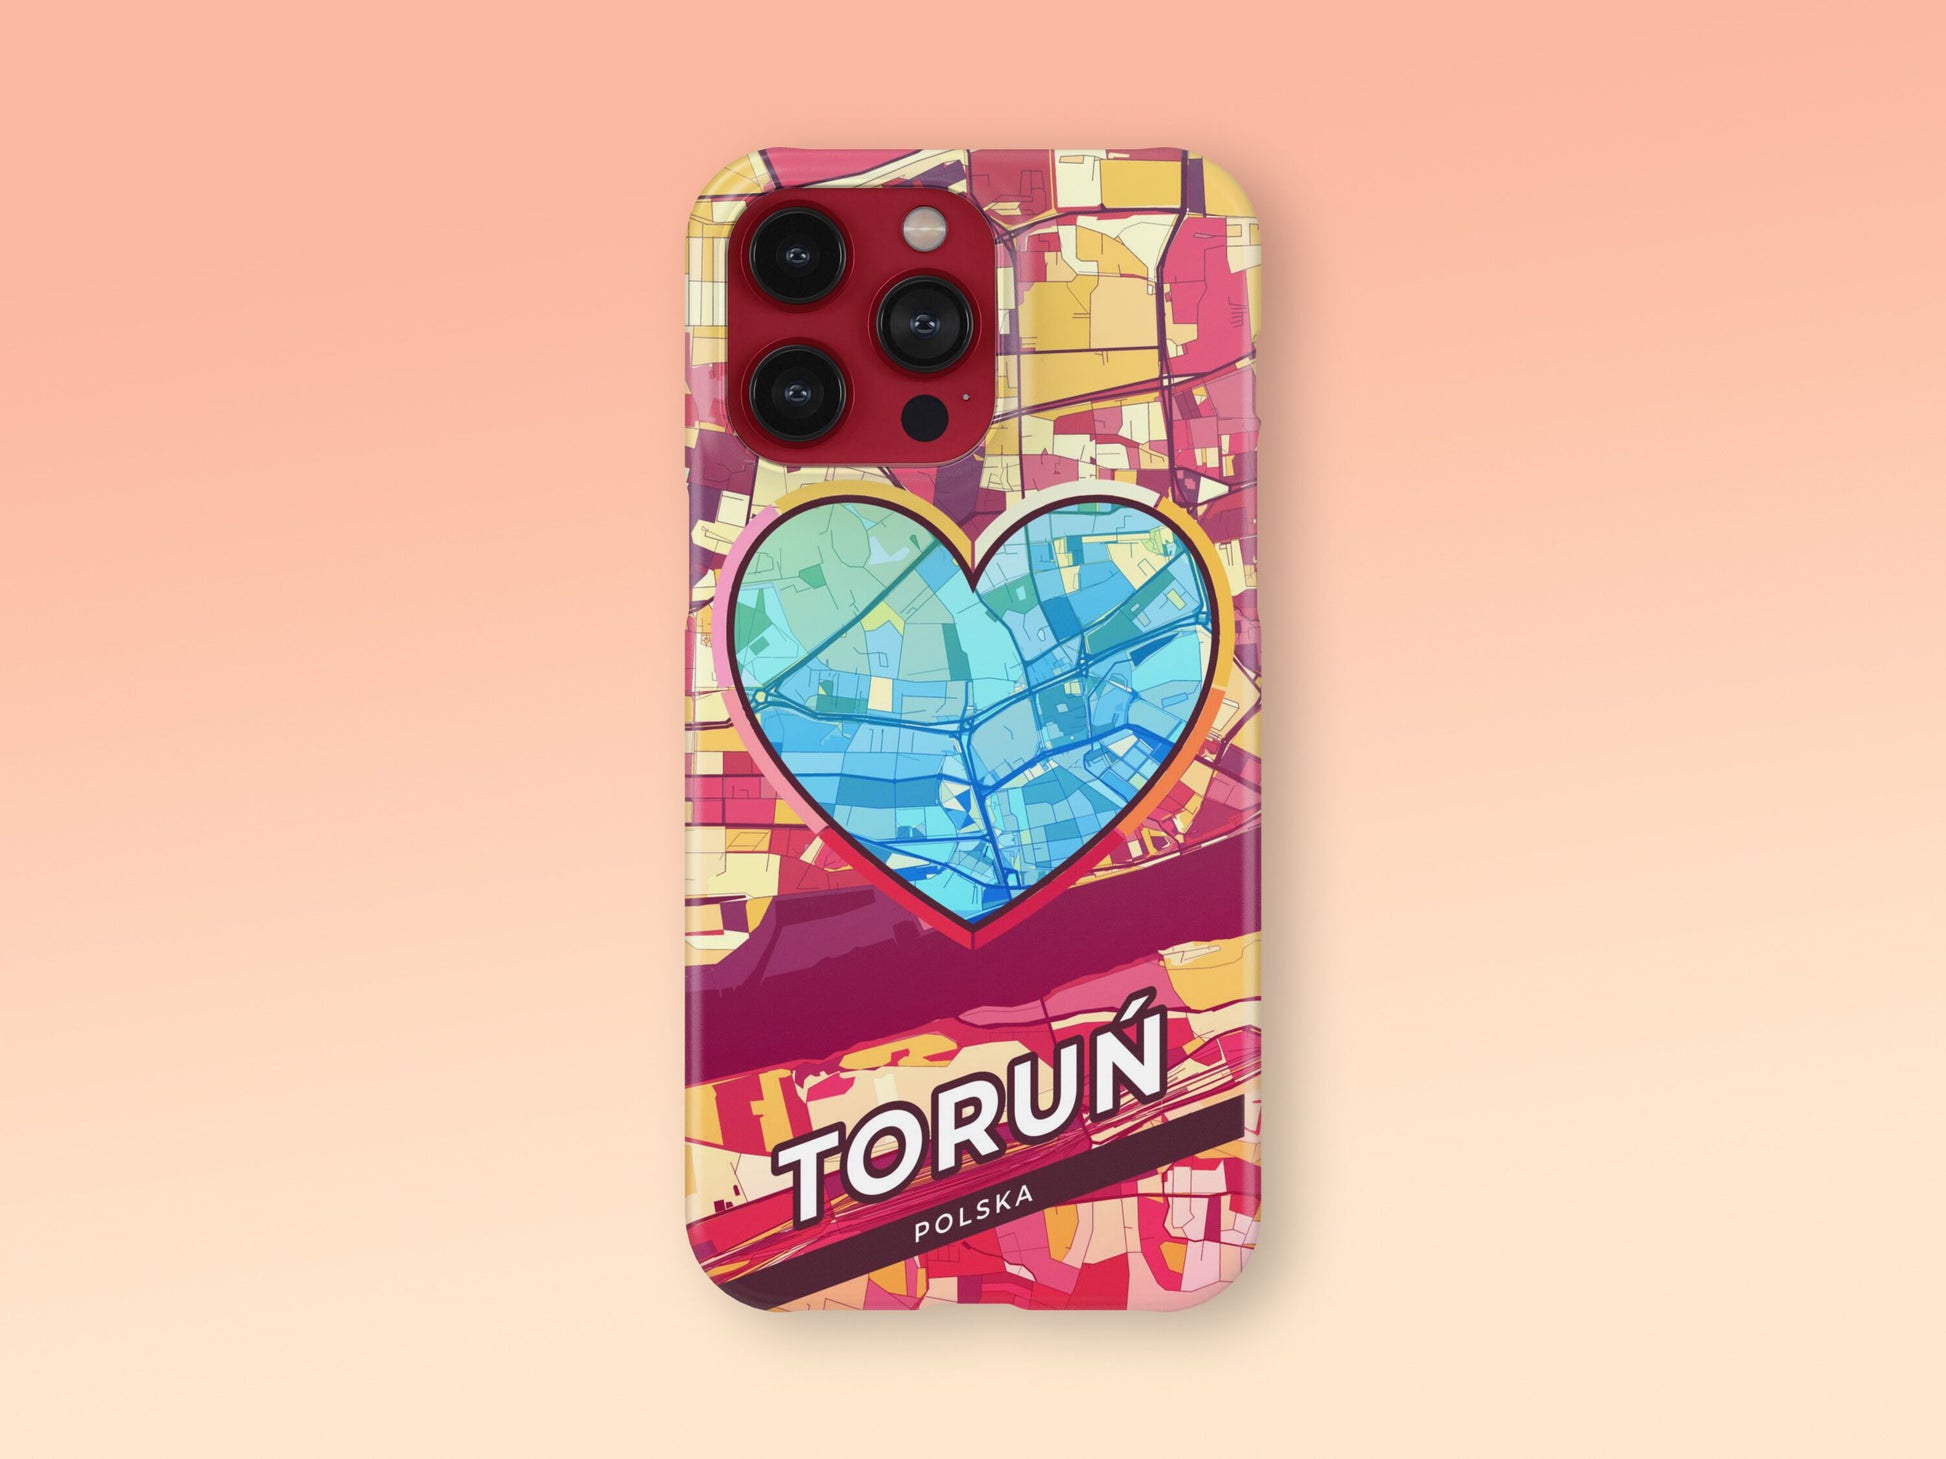 Toruń Poland slim phone case with colorful icon 2